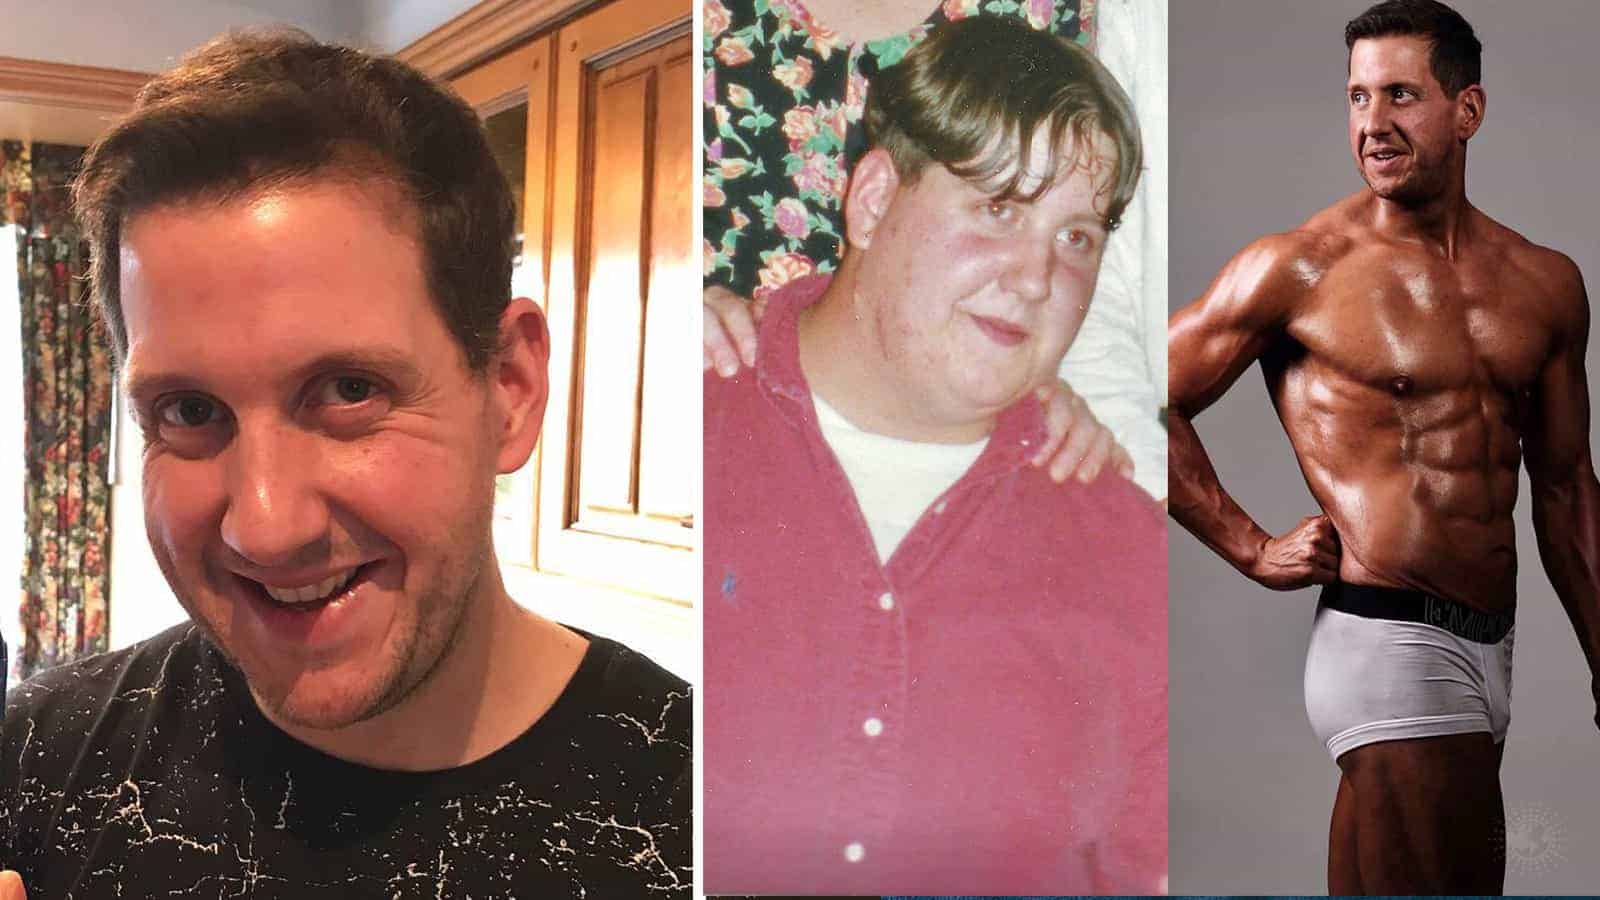 Man Loses 140 Pounds on a Road to Self Discovery